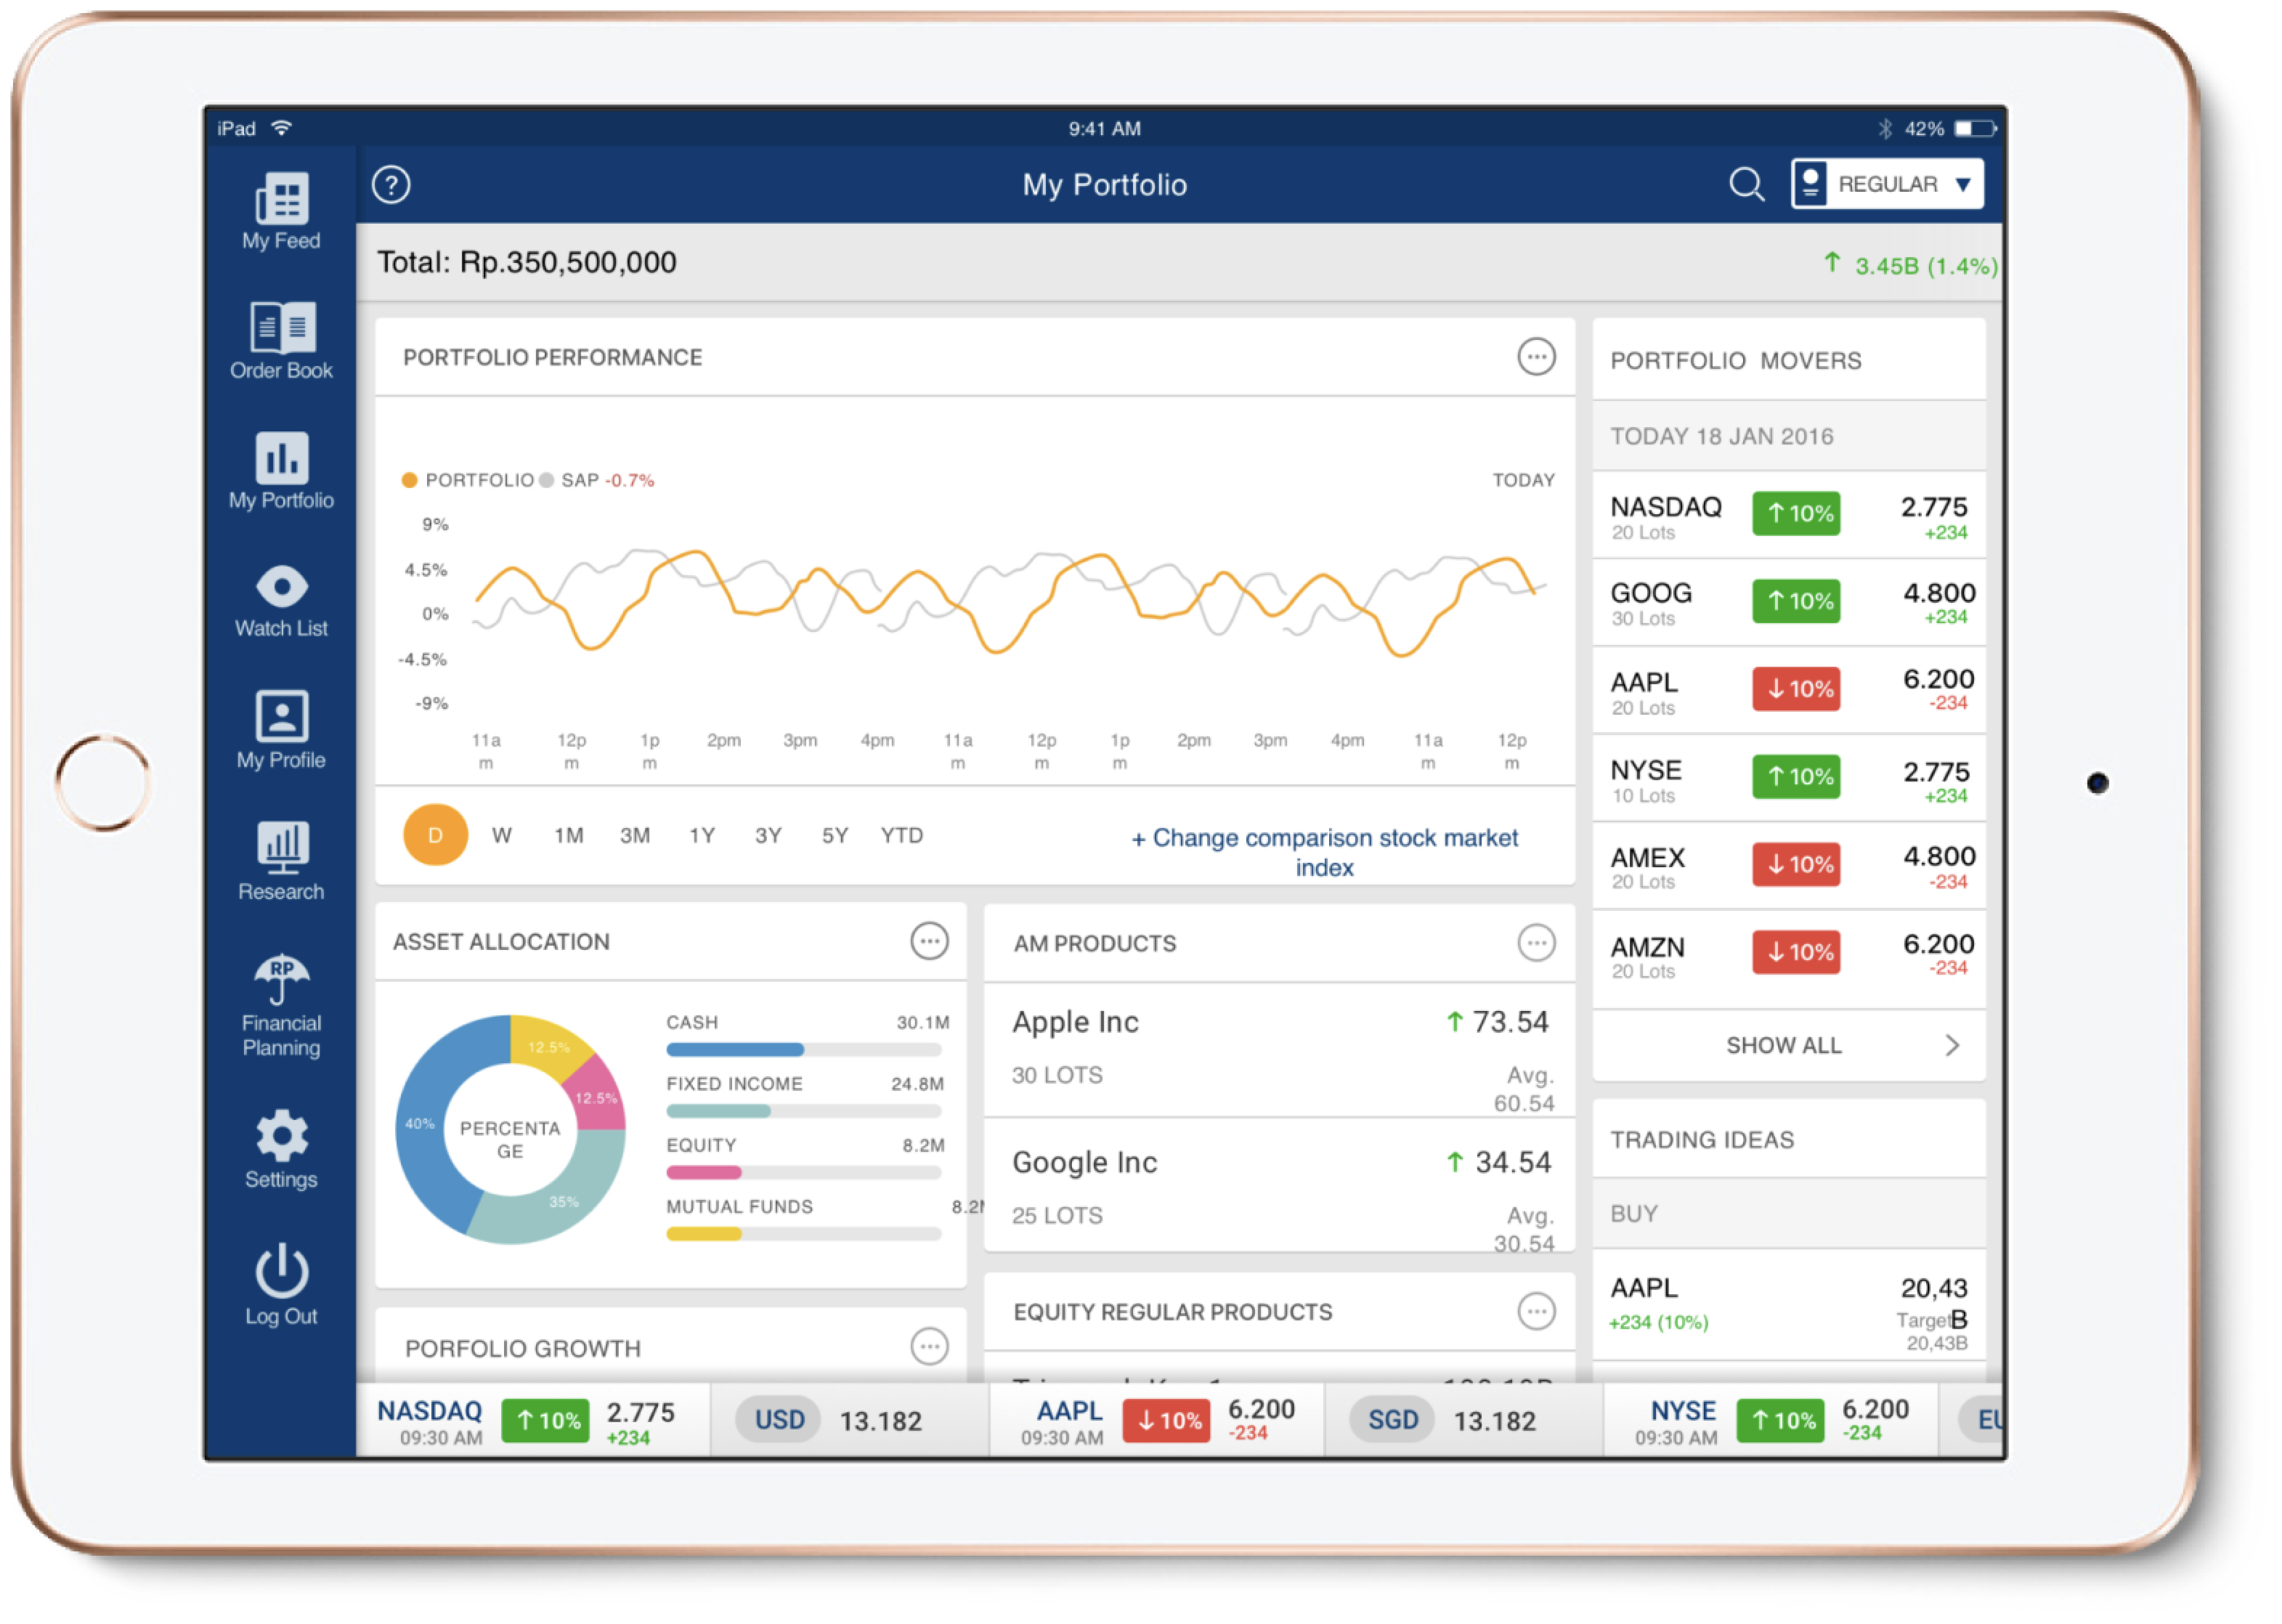 Trimegah’s users could manage all aspects of their stock portfolio, perform transactions, set trading alerts and subscribe to personalized market content through tablet